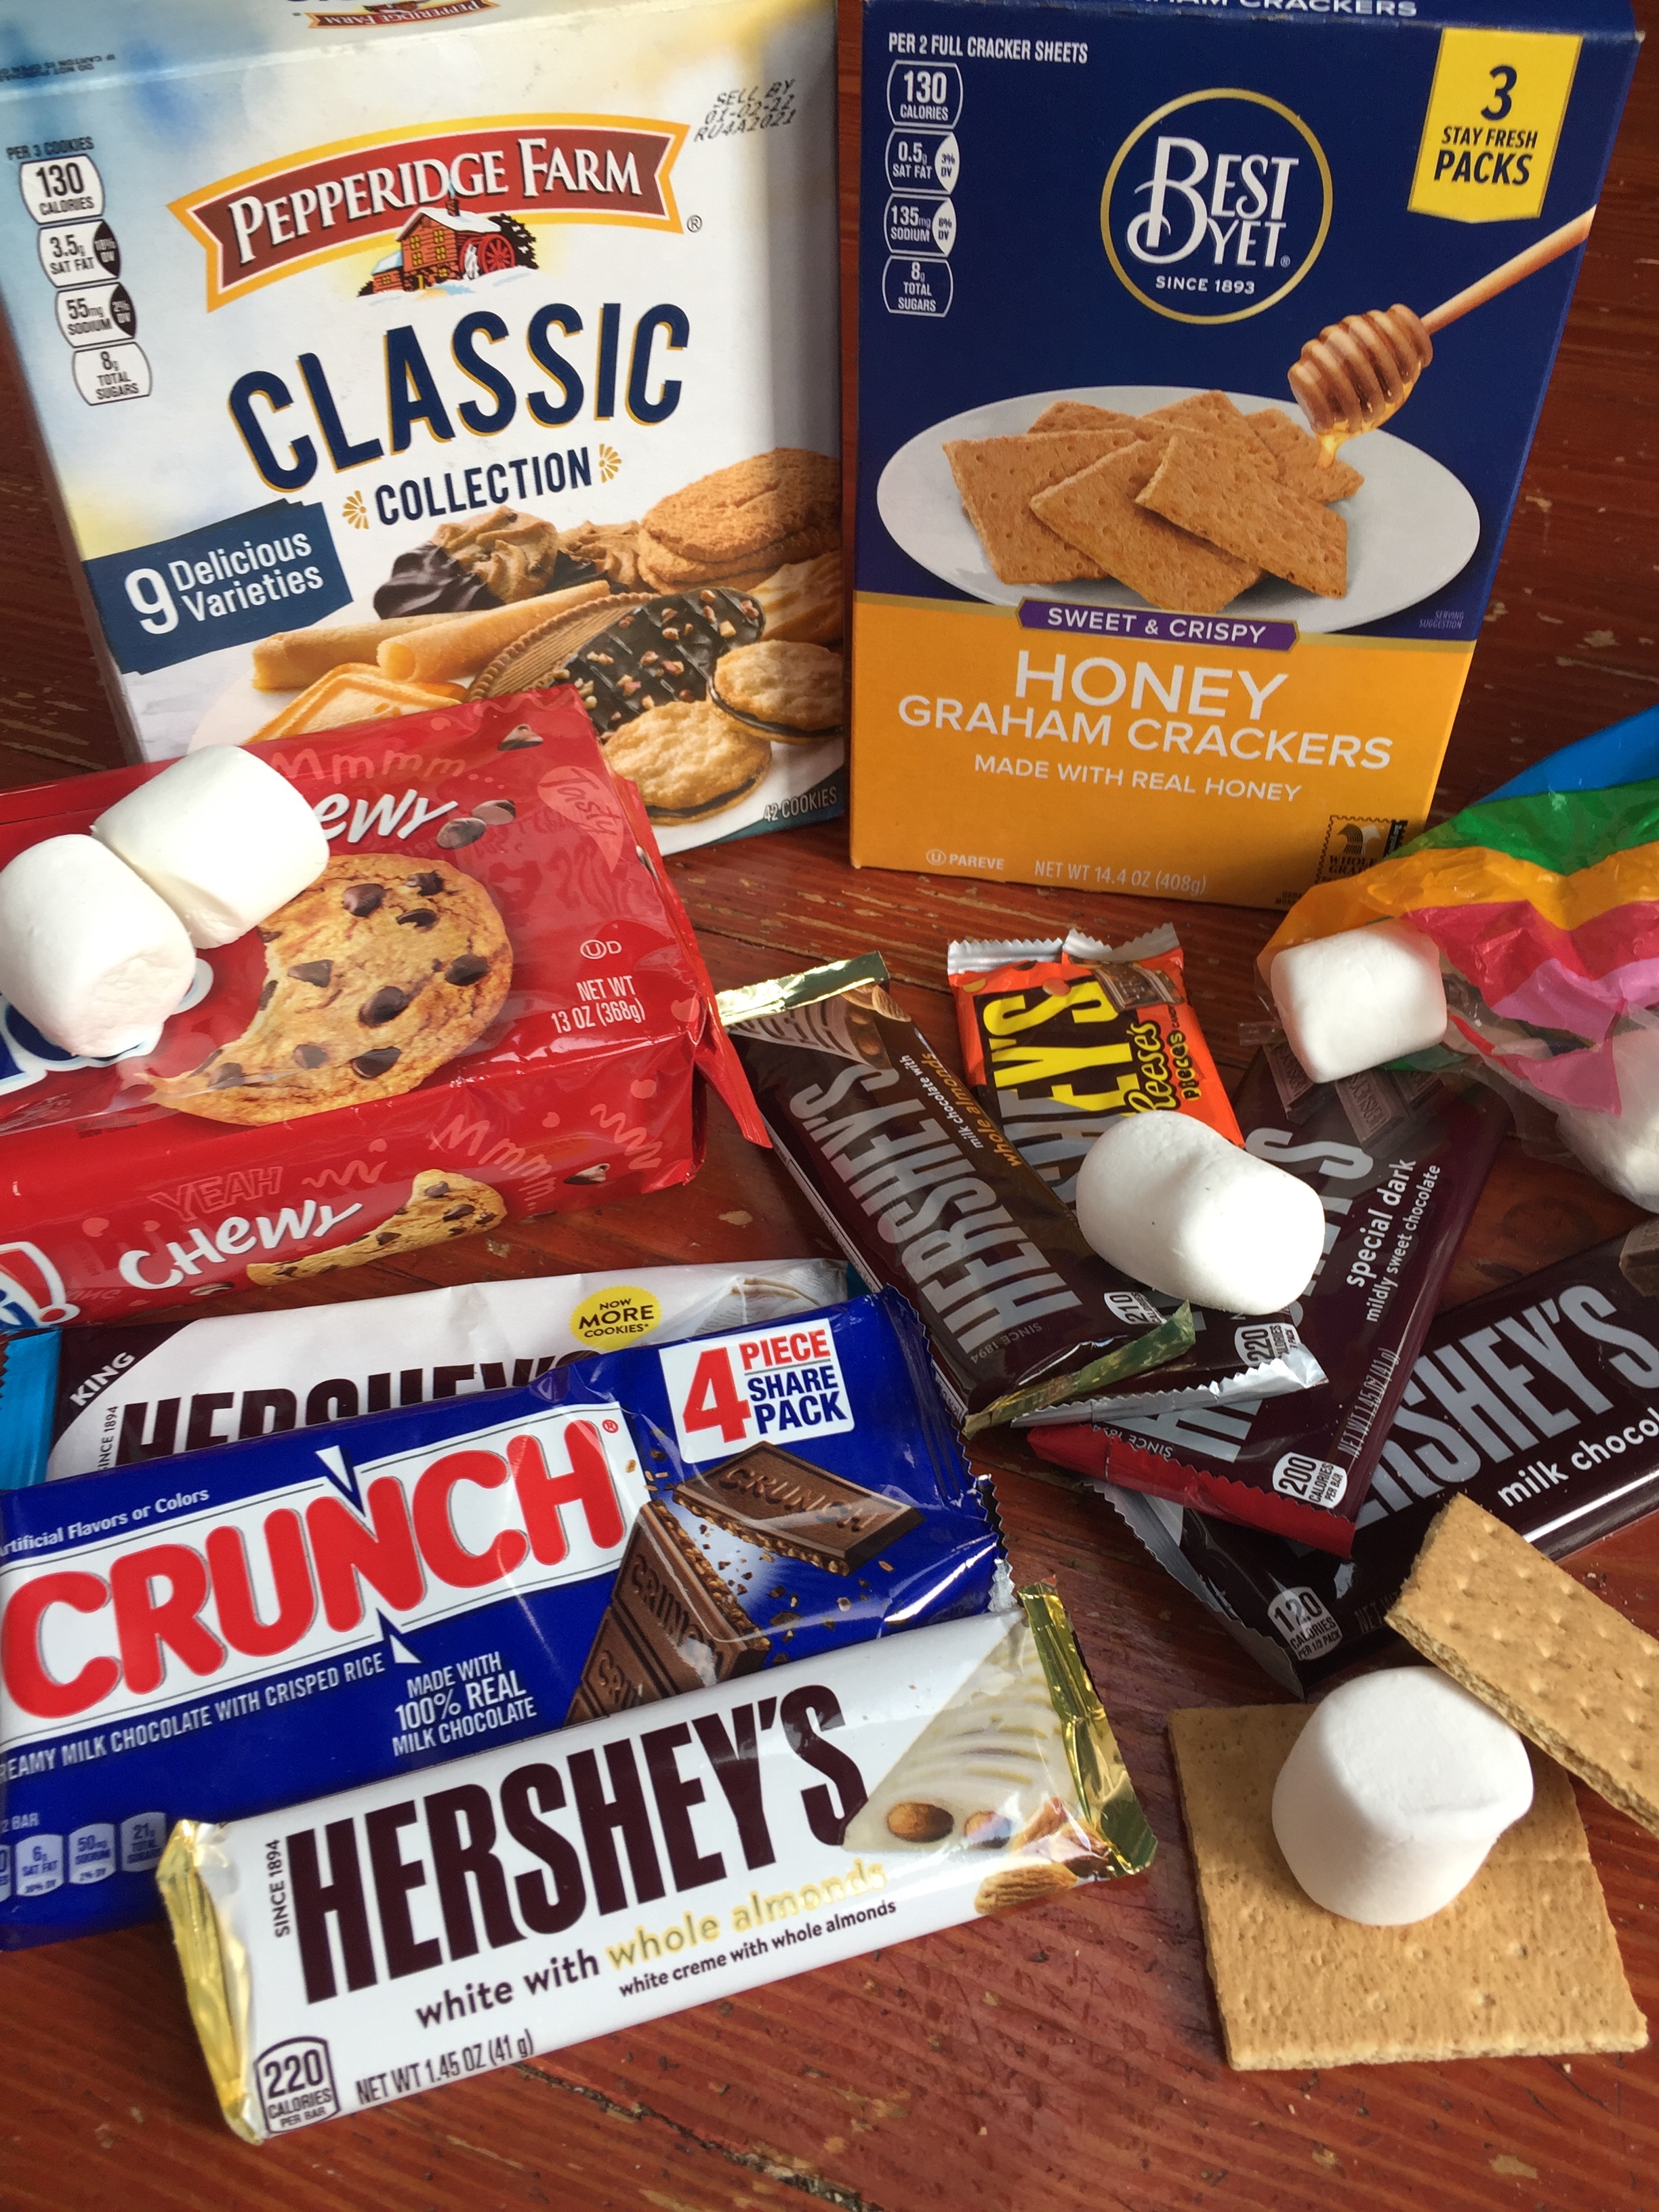 Deluxe s'mores ingredients graham crackers chocolate chip cookies marshmallows Hershey's chocolate bars Nestle Crunch bars Pepperidge Farm cookie assortment